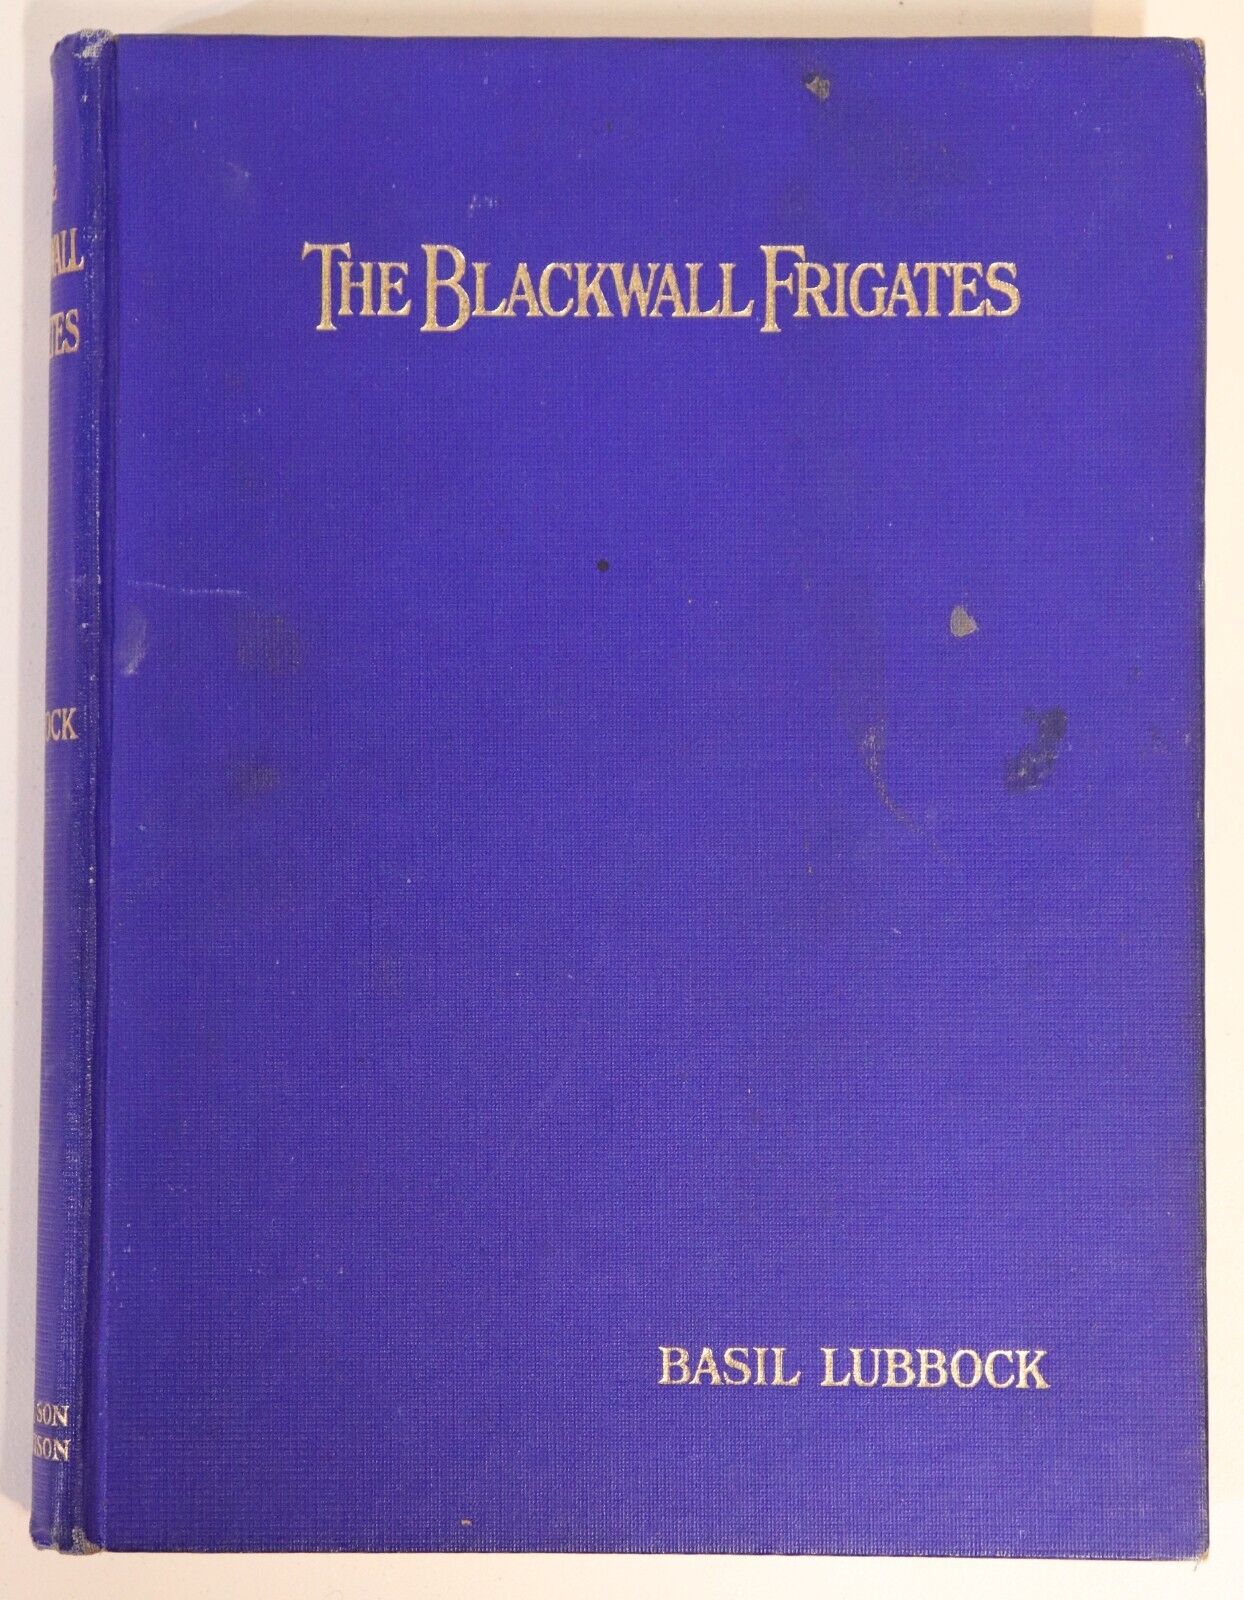 The Blackwall Frigates by Basil Lubbock - 1950 - Maritime History Book